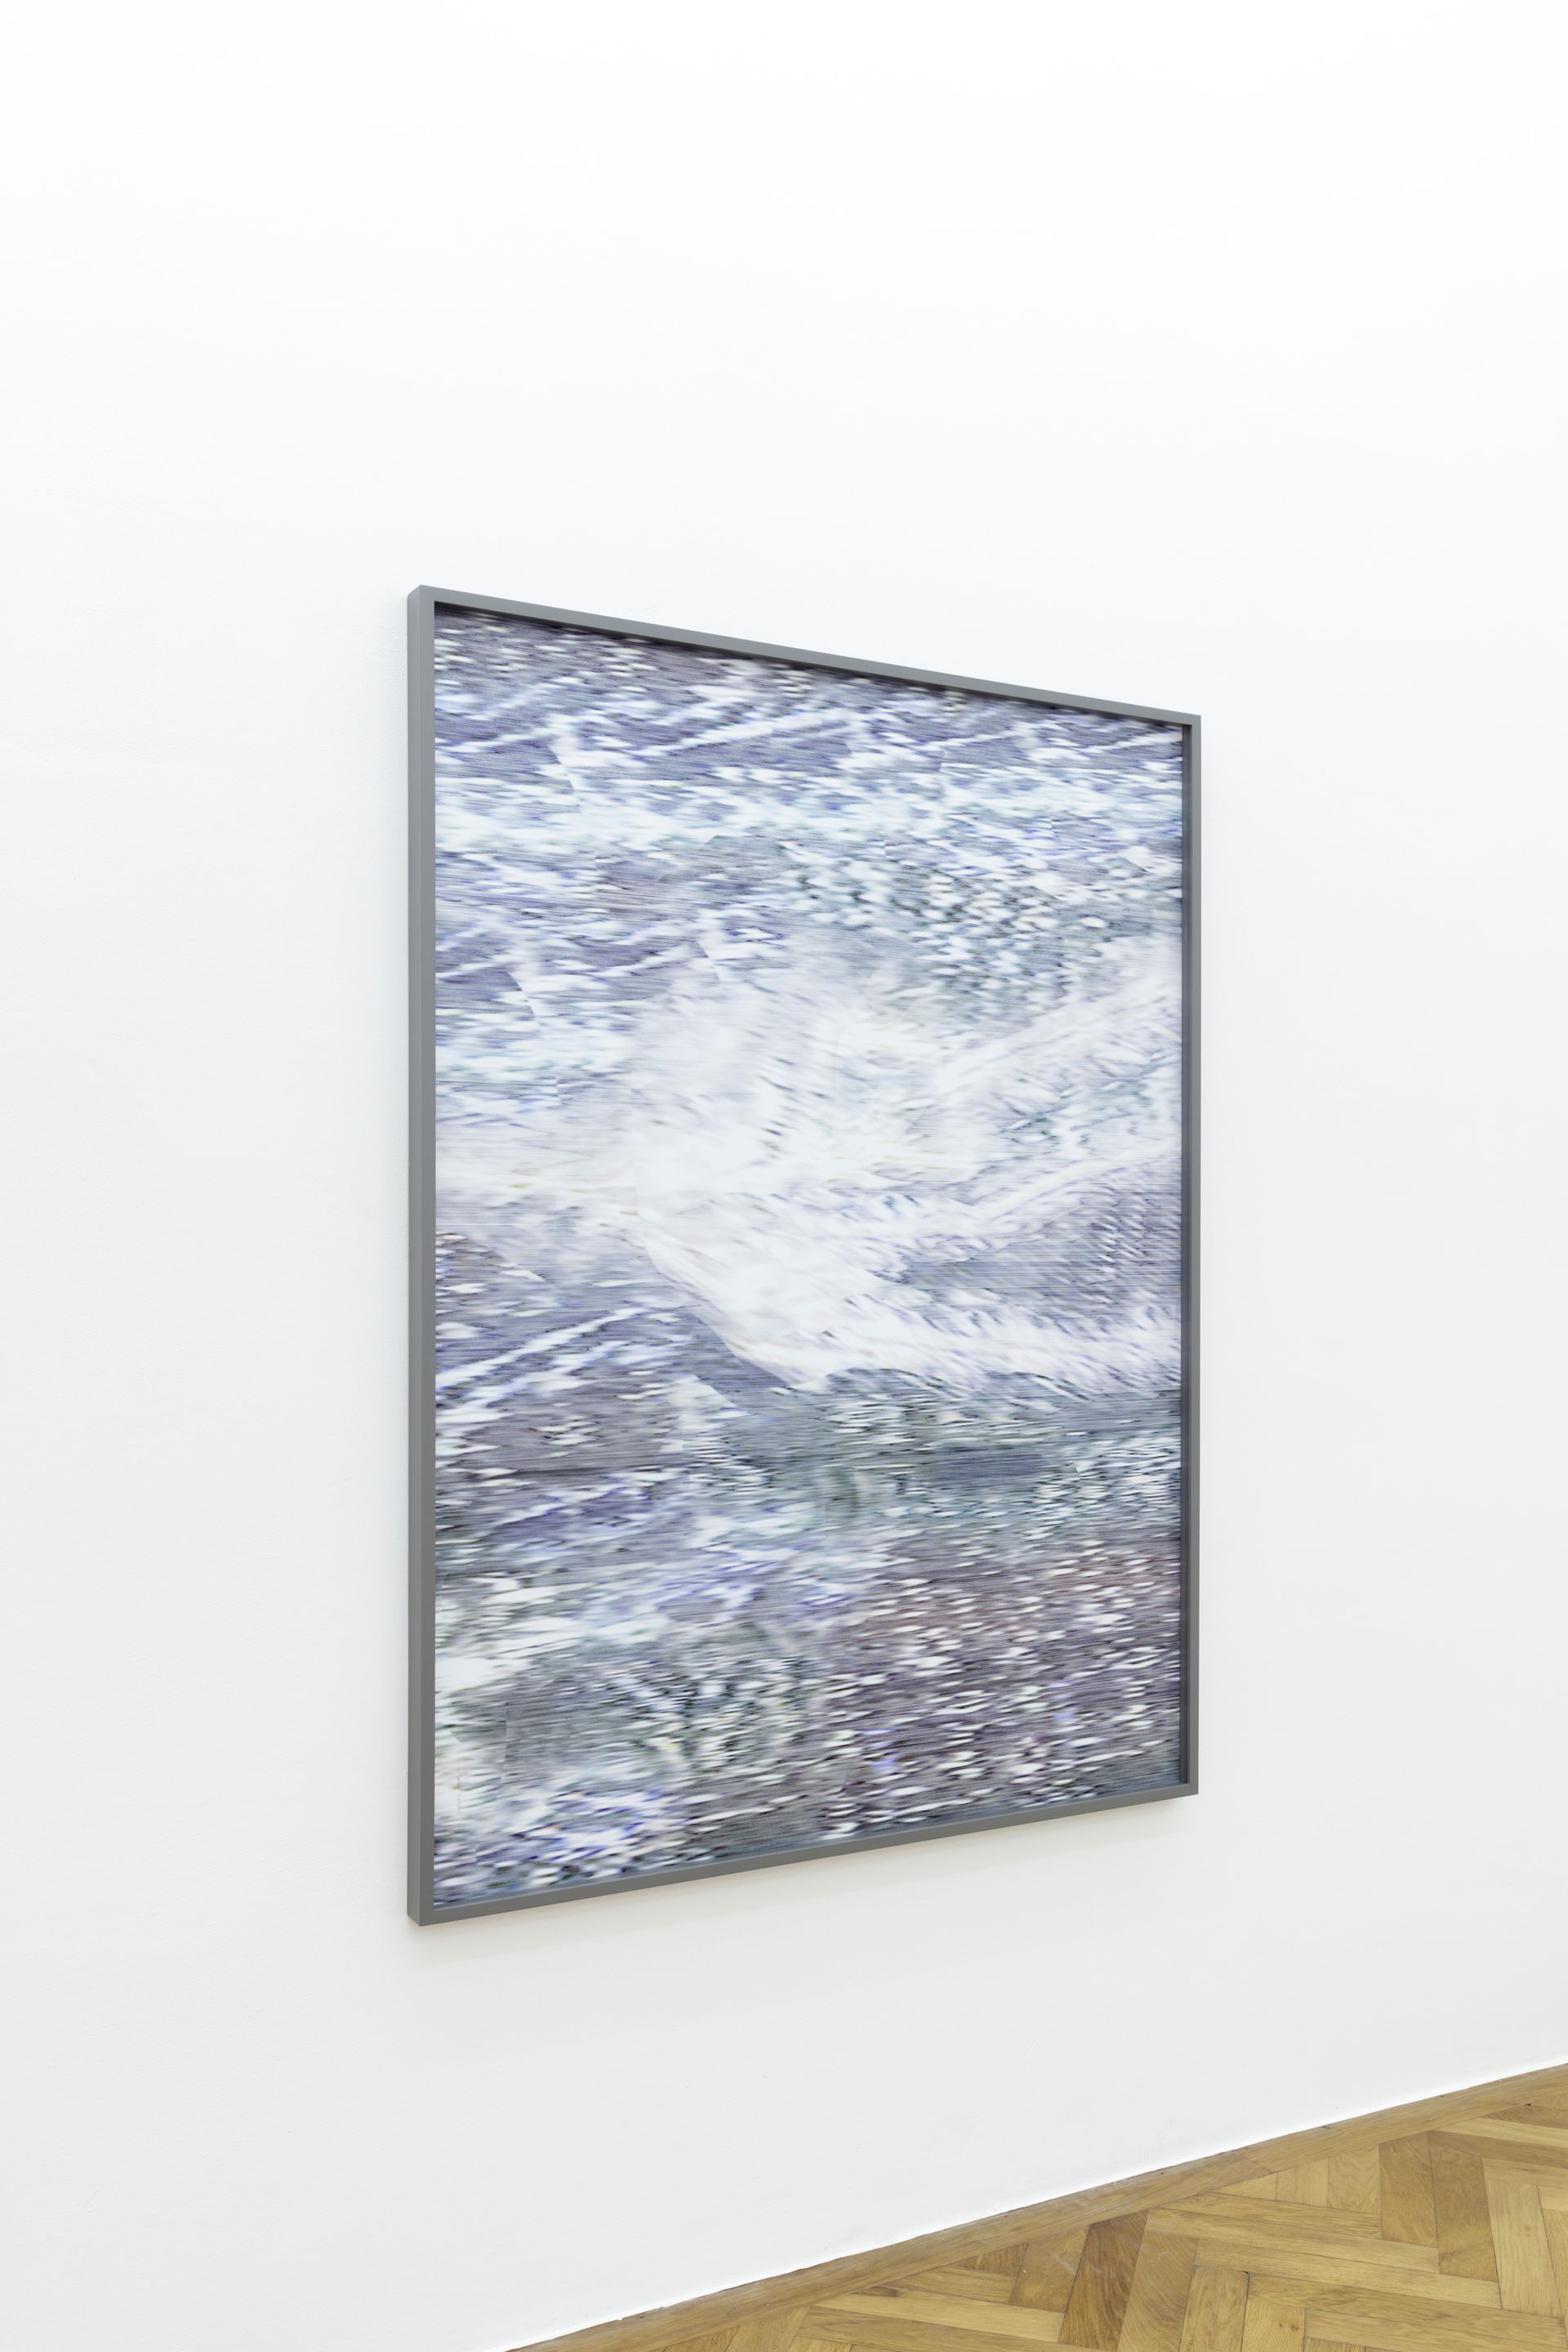 Anna Vogel, Electric Mountains XXVI, 2021, spray paint on pigment print, scratched, frame finished in dusty gray, 160 x 120 cm